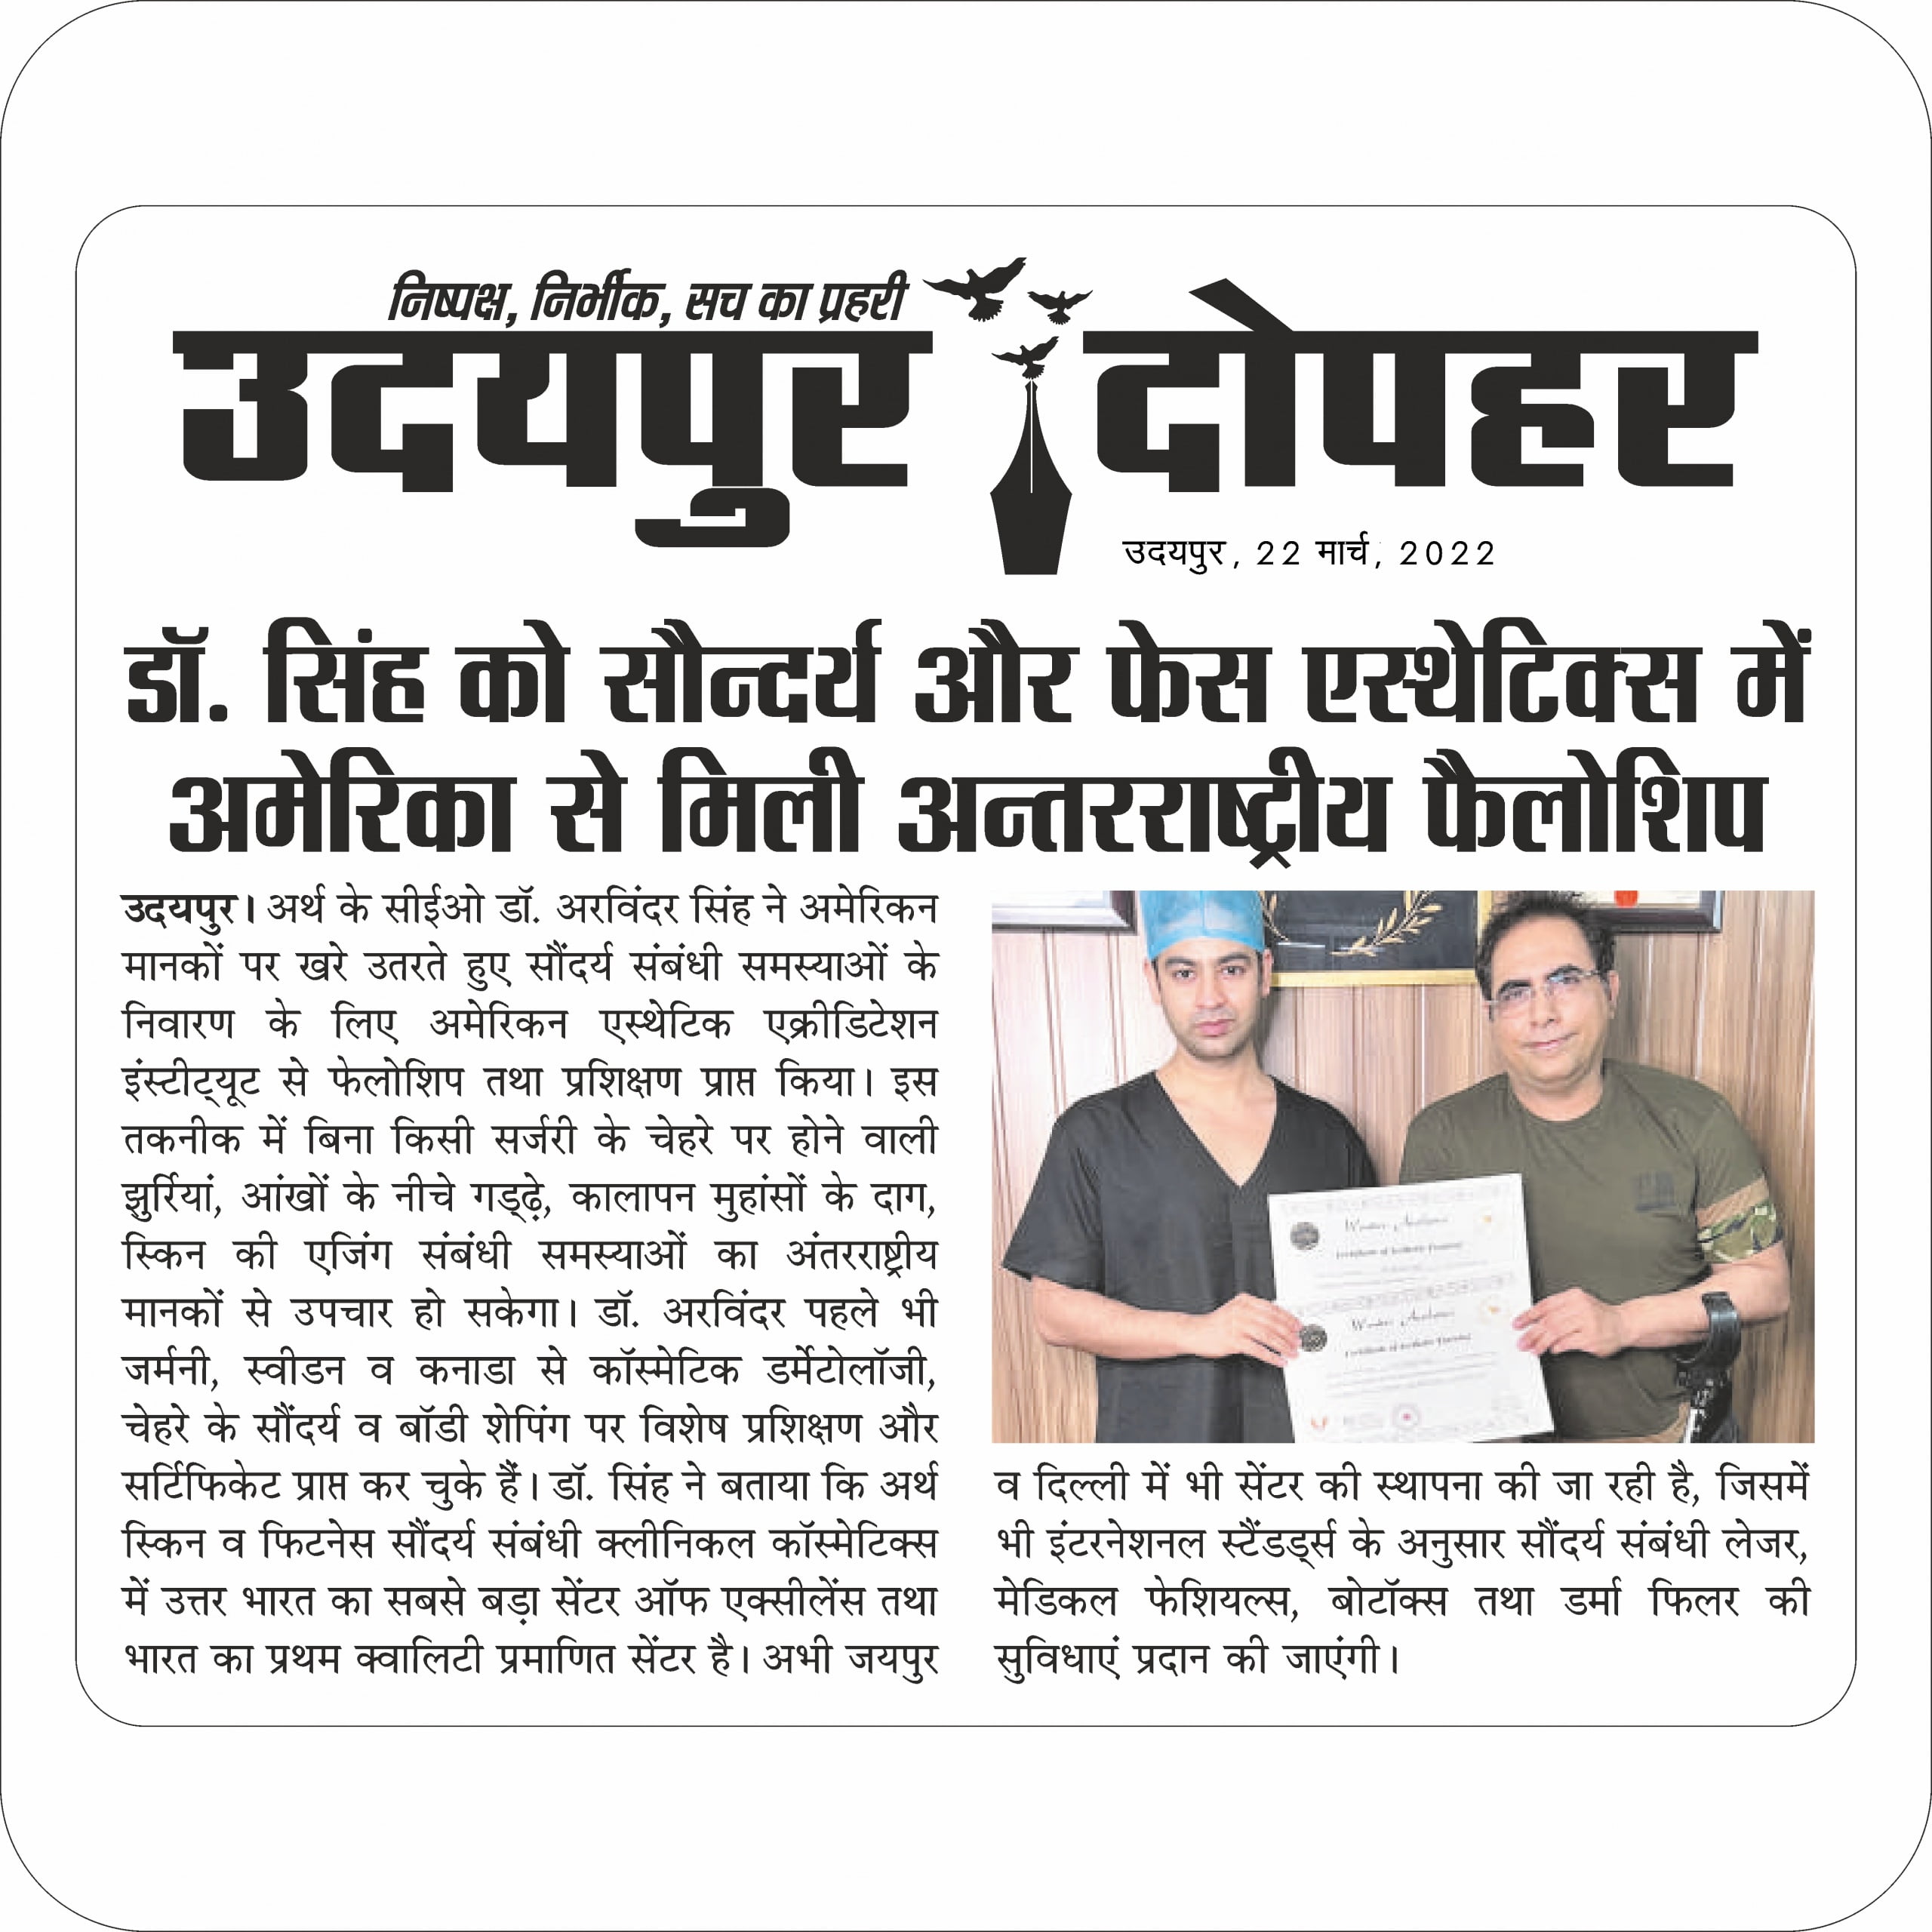 CEO, and CMD of Arth Group, Dr. Arvinder Singh, gained the International Fellowship in ACE Statics.